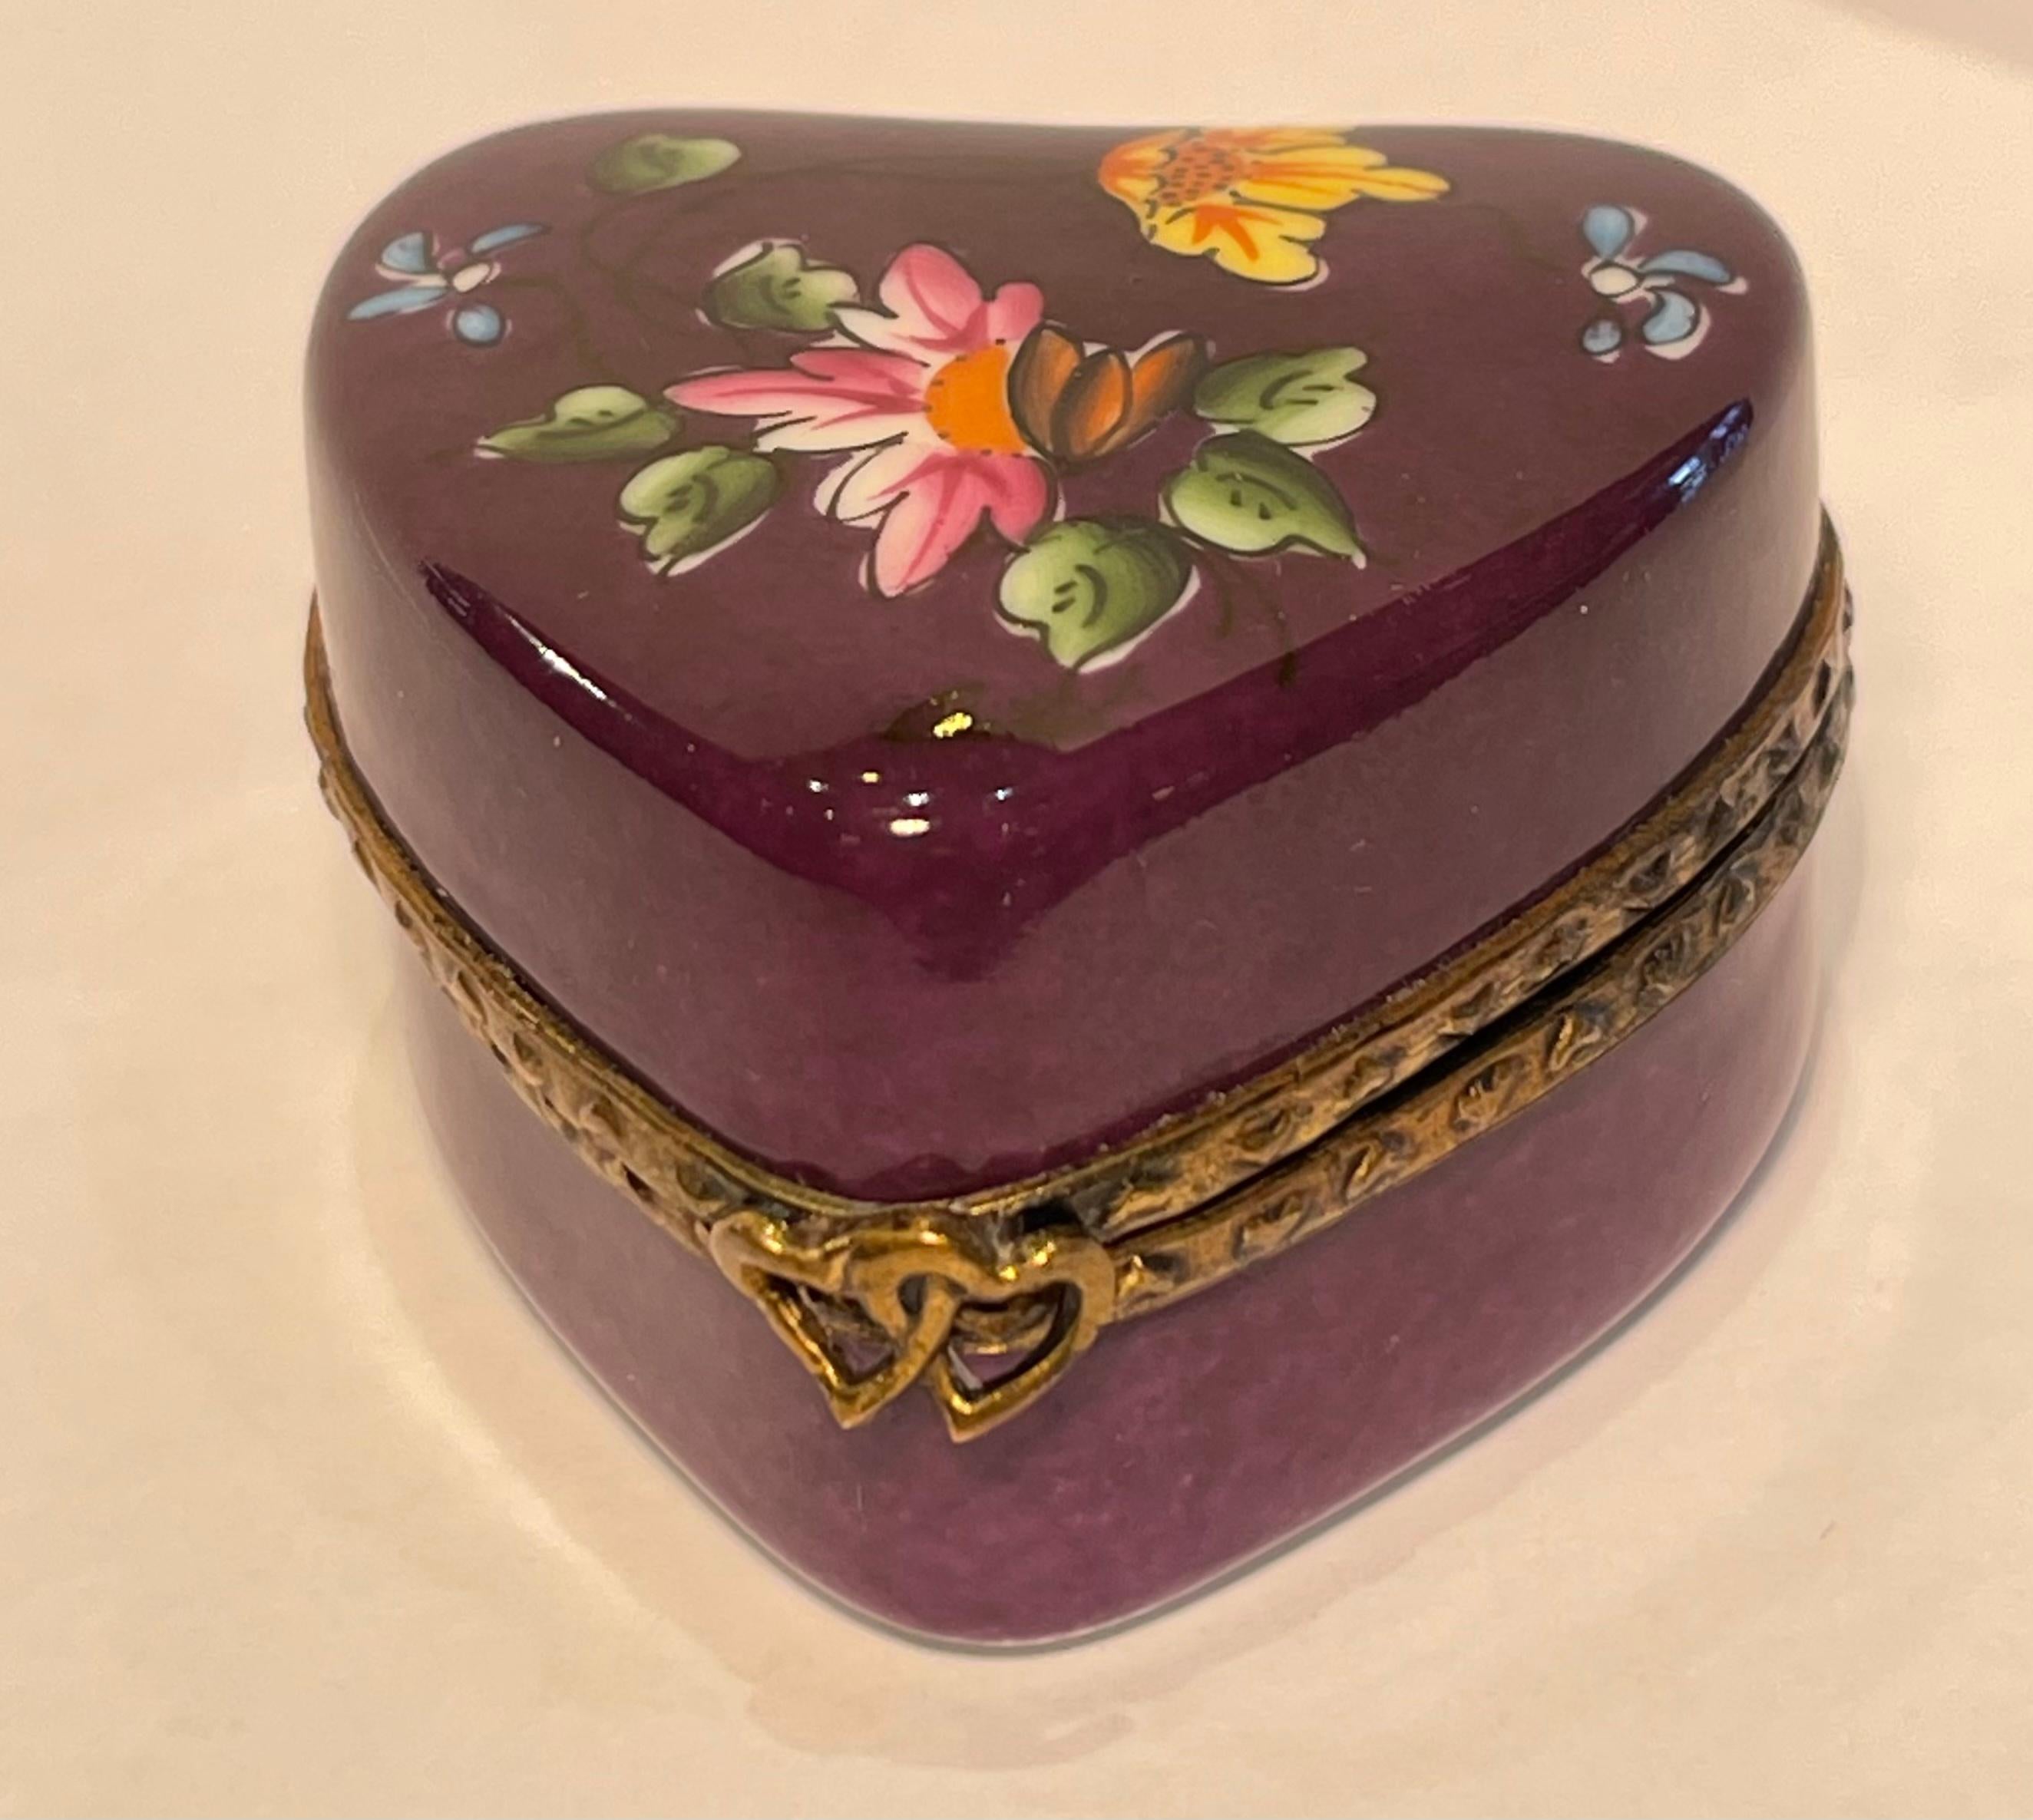 Collectible handmade and hand painted Limoges porcelain miniature heart shaped trinket box features a rich deep purple background with a beautiful hand painted polychrome floral motif on the top. The fittings are a richly patterned antique gold gilt